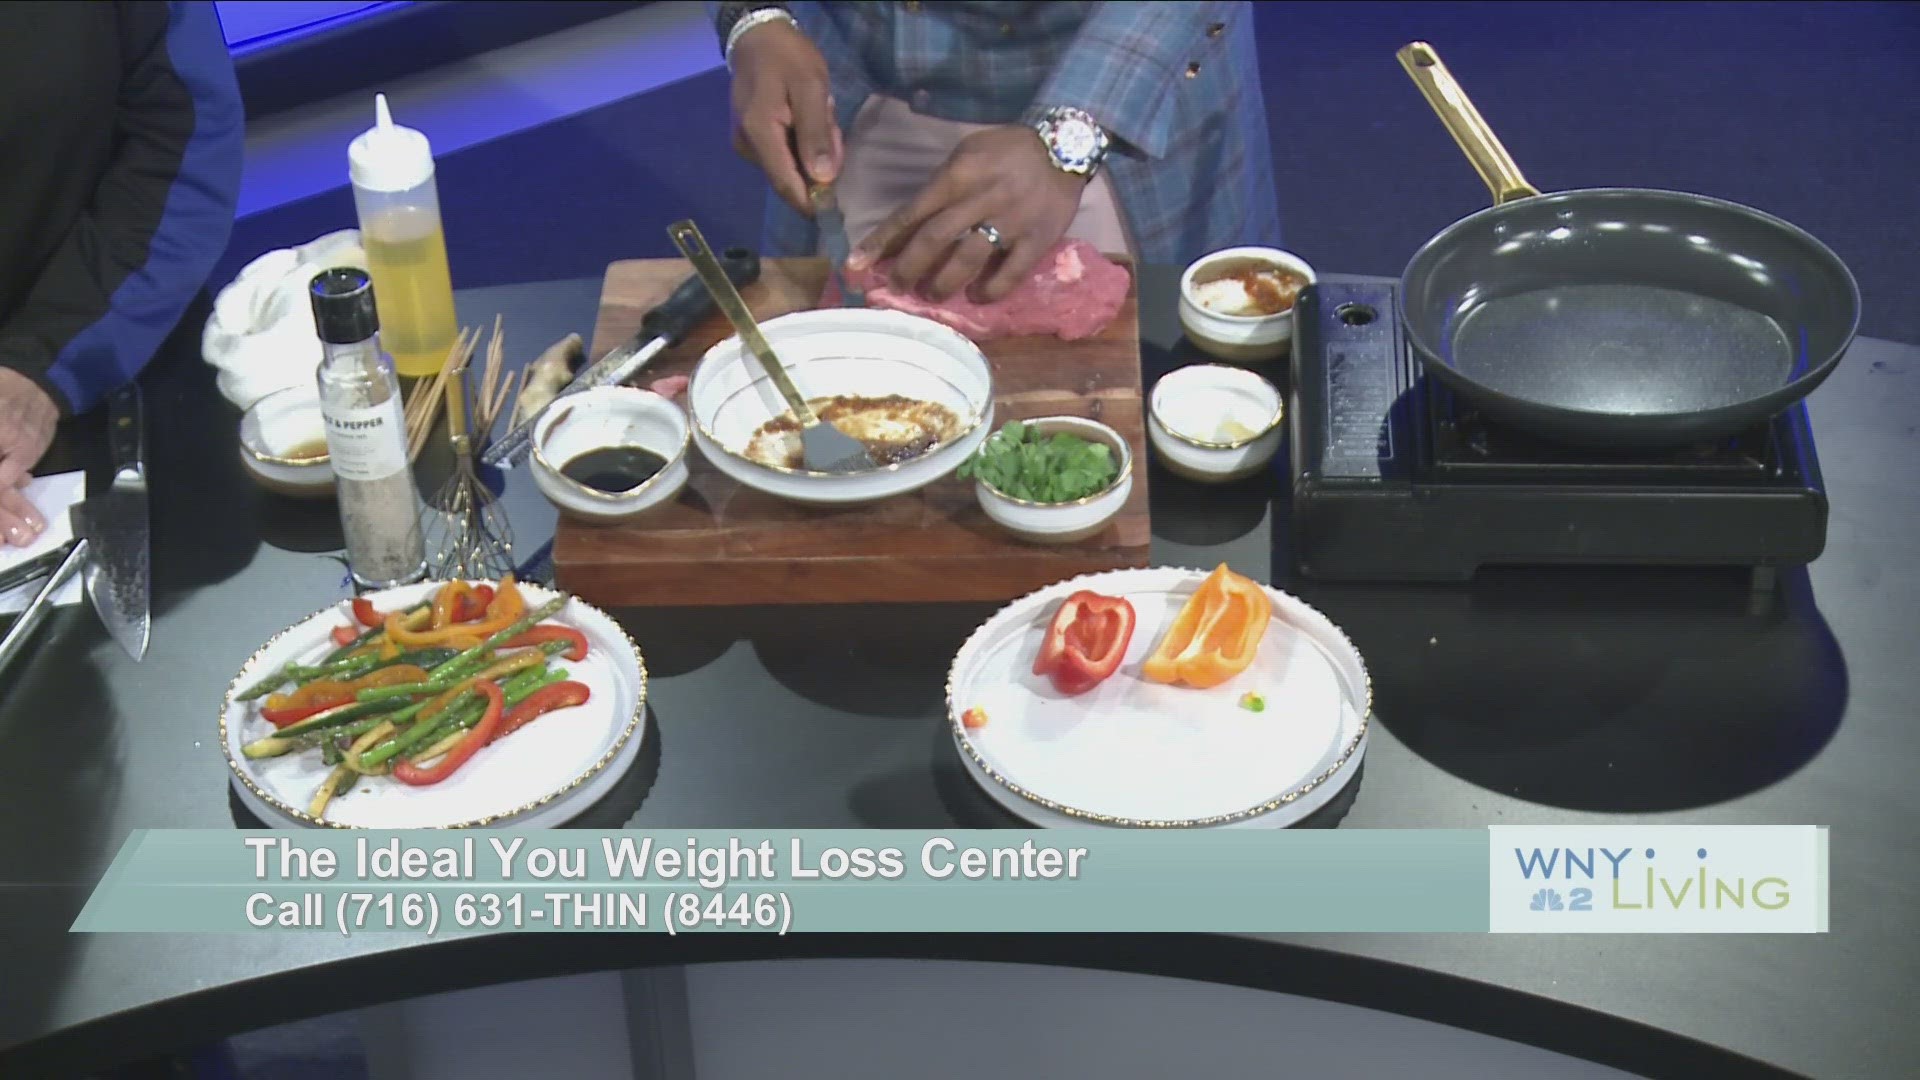 Sat 4/13 -The Ideal You Weight Loss Center (THIS VIDEO IS SPONSORED BY IDEAL YOU WEIGHT LOSS CENTER)